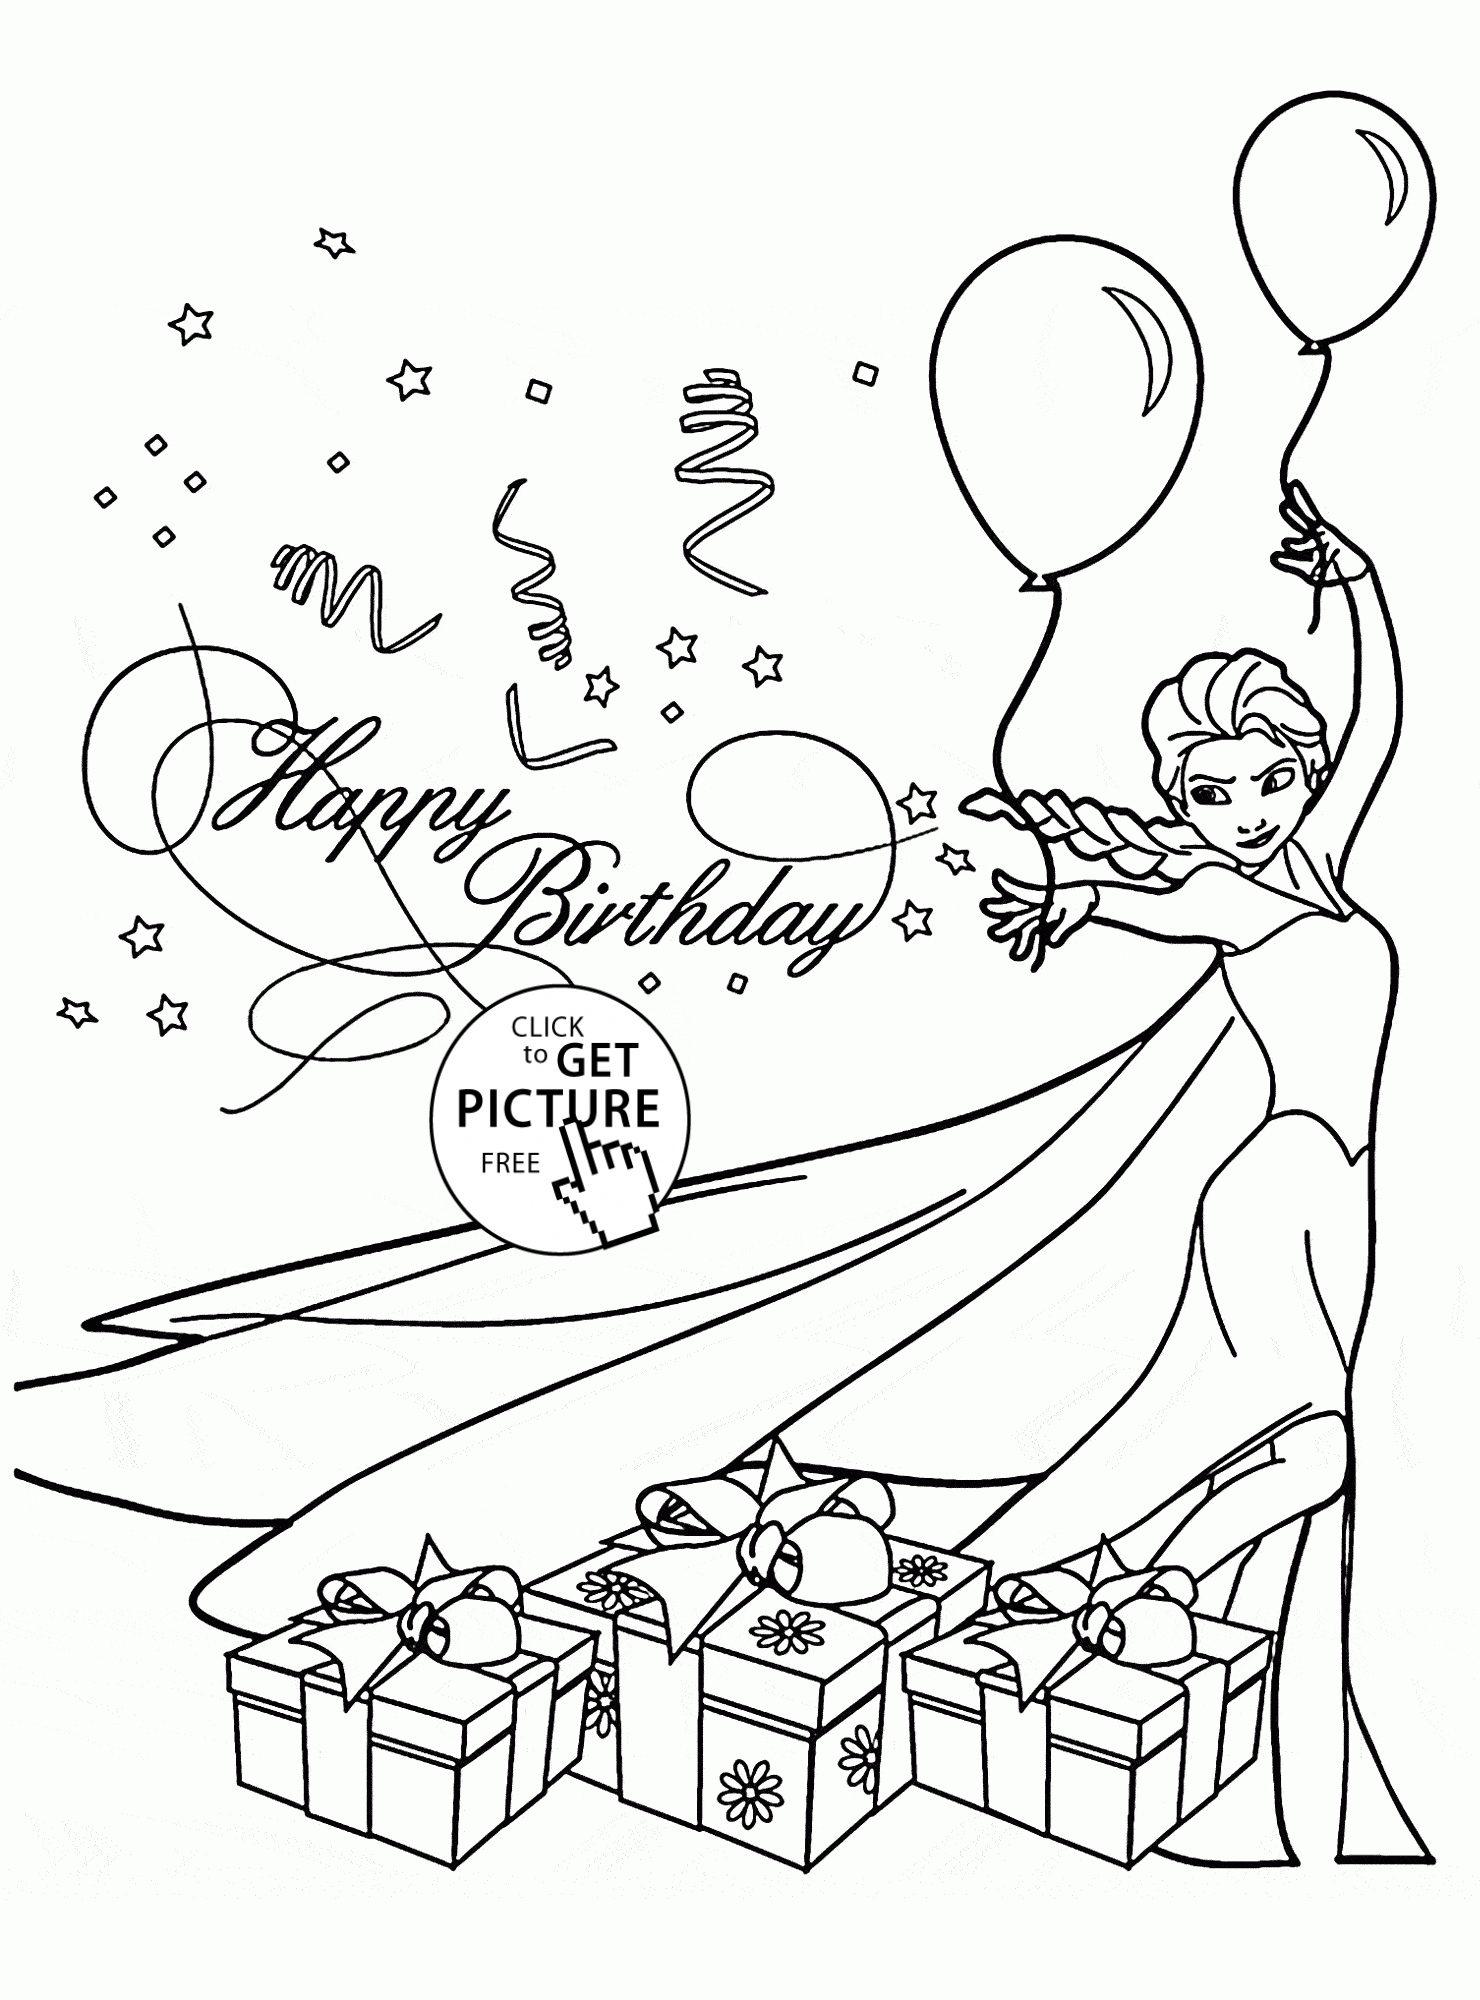 Birthday Card Coloring Page at GetColorings.com | Free printable